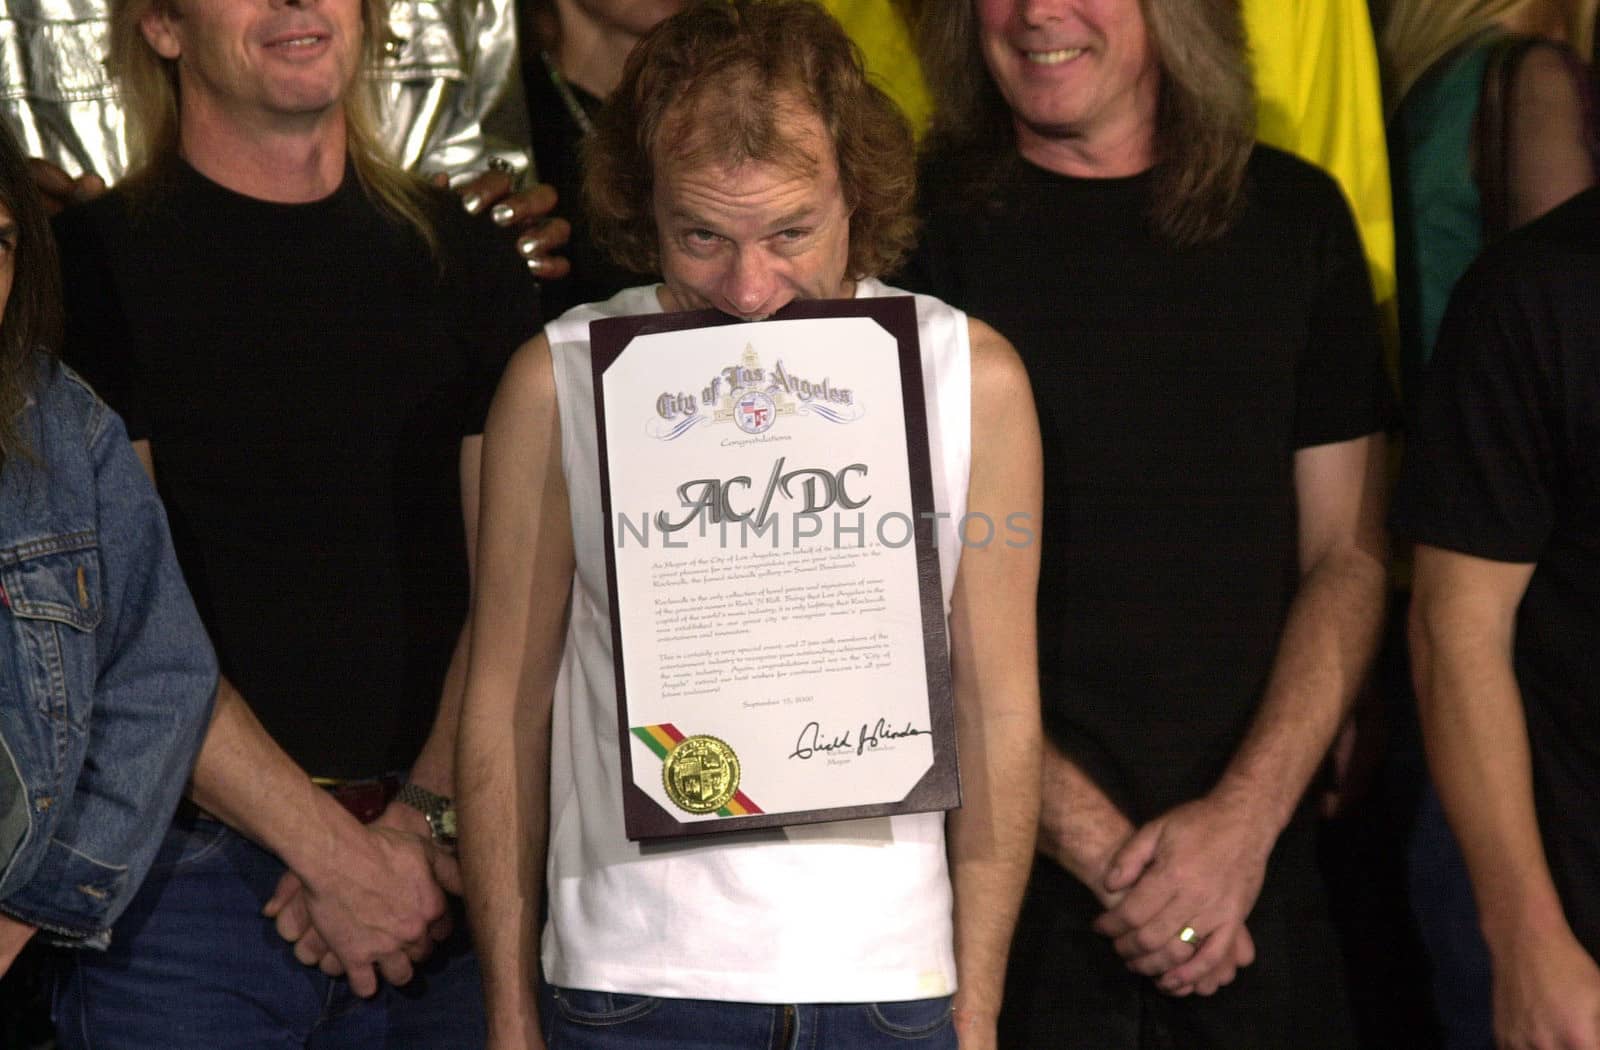 Angus Young at the ceremony where they were inducted into Sunset Blvd's Rockwalk. 09-15-00